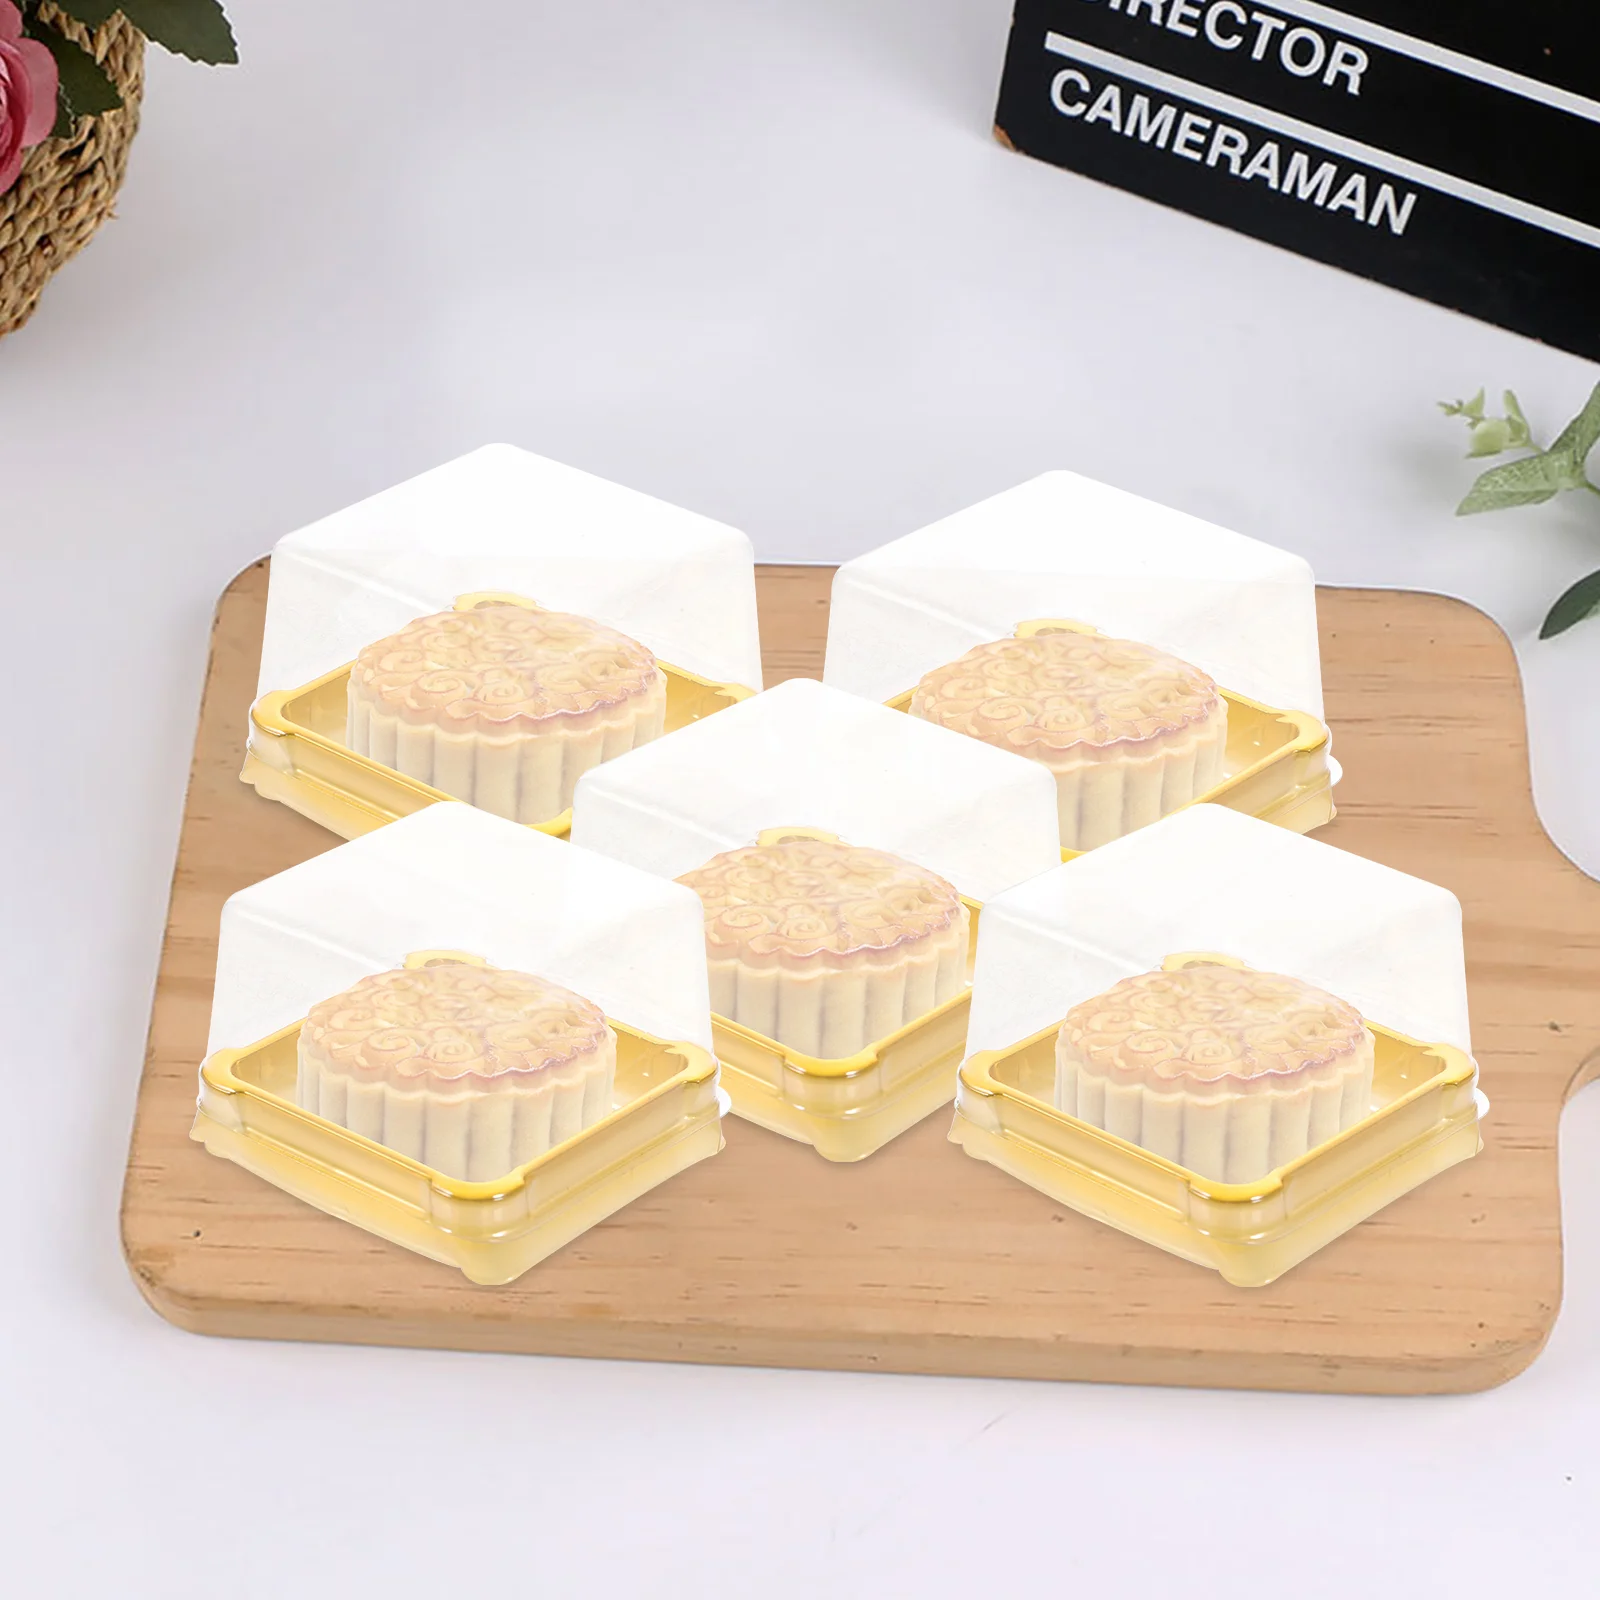 

50 Pcs Cheese Gift Box Bakery Boxes Square Serving Tray Muffin Holder Box Cake Platter Dome Macaroon Boxes Almond Cookies